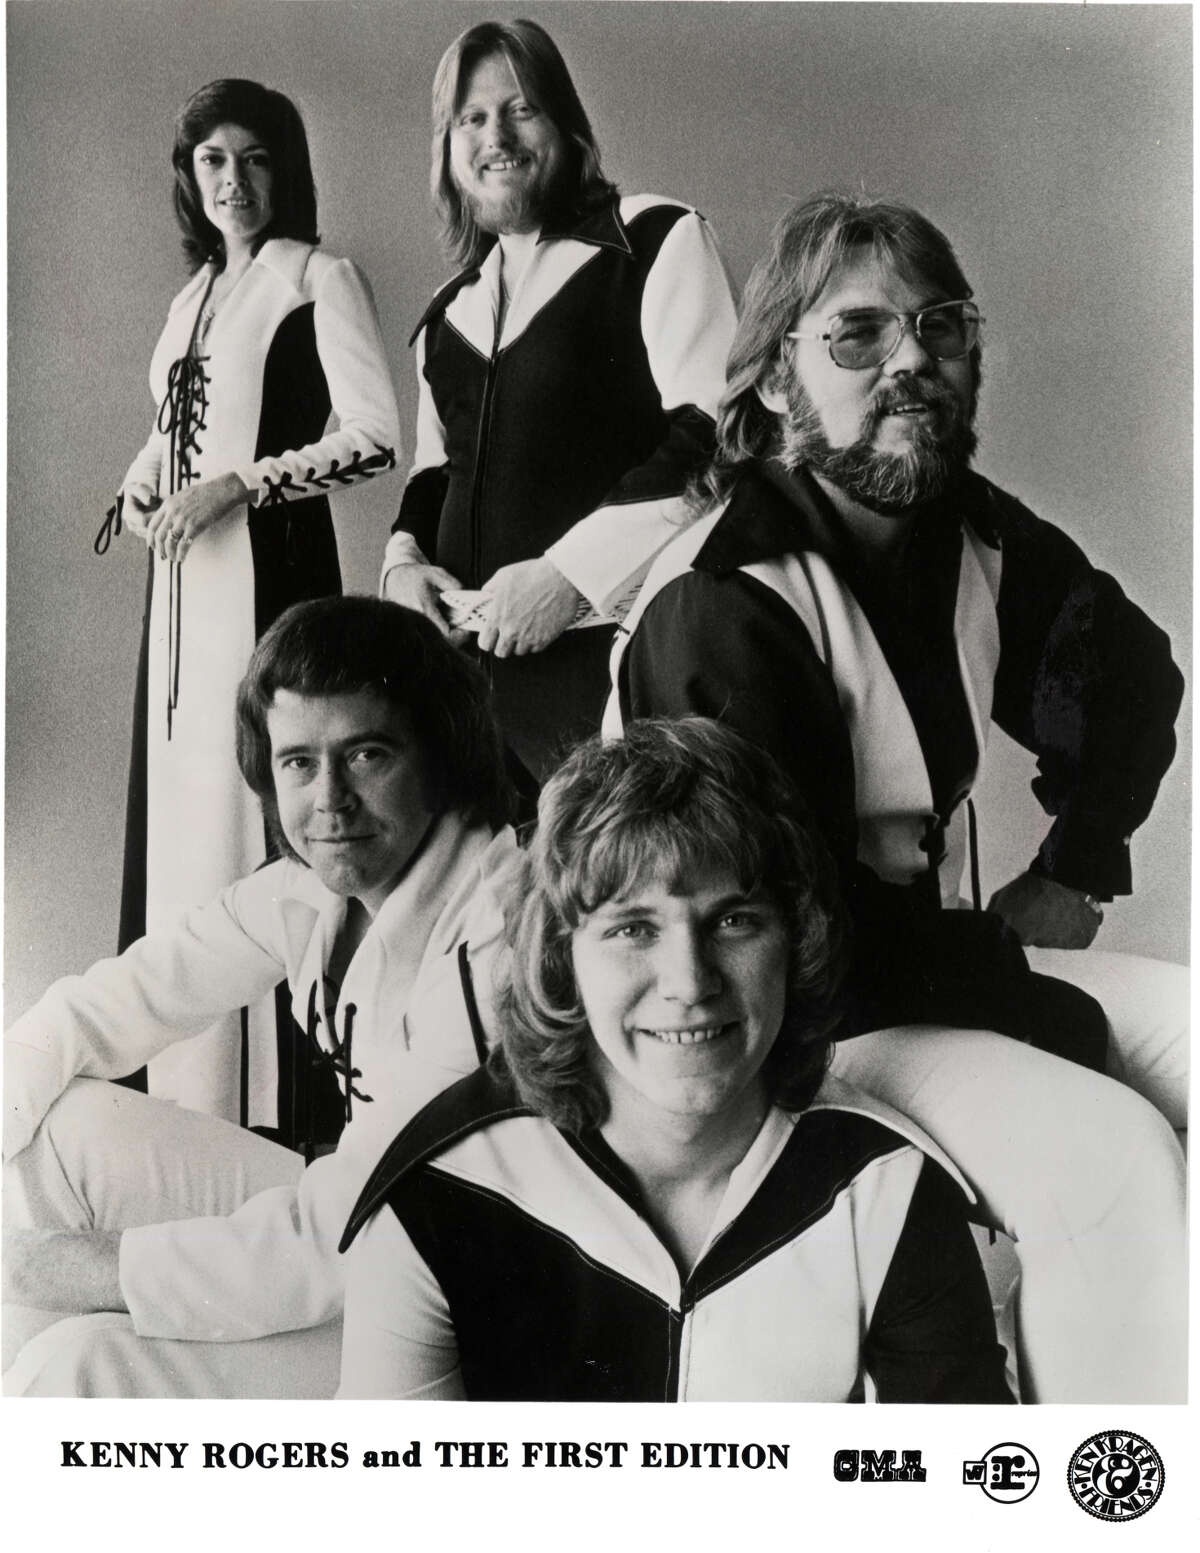 Folk-rock group Kenny Rogers and the First Edition featured, clockwise from top left, Thelma Camacho, Mickey Jones, Kenny Rogers, Terry Williams and Mike Settle.